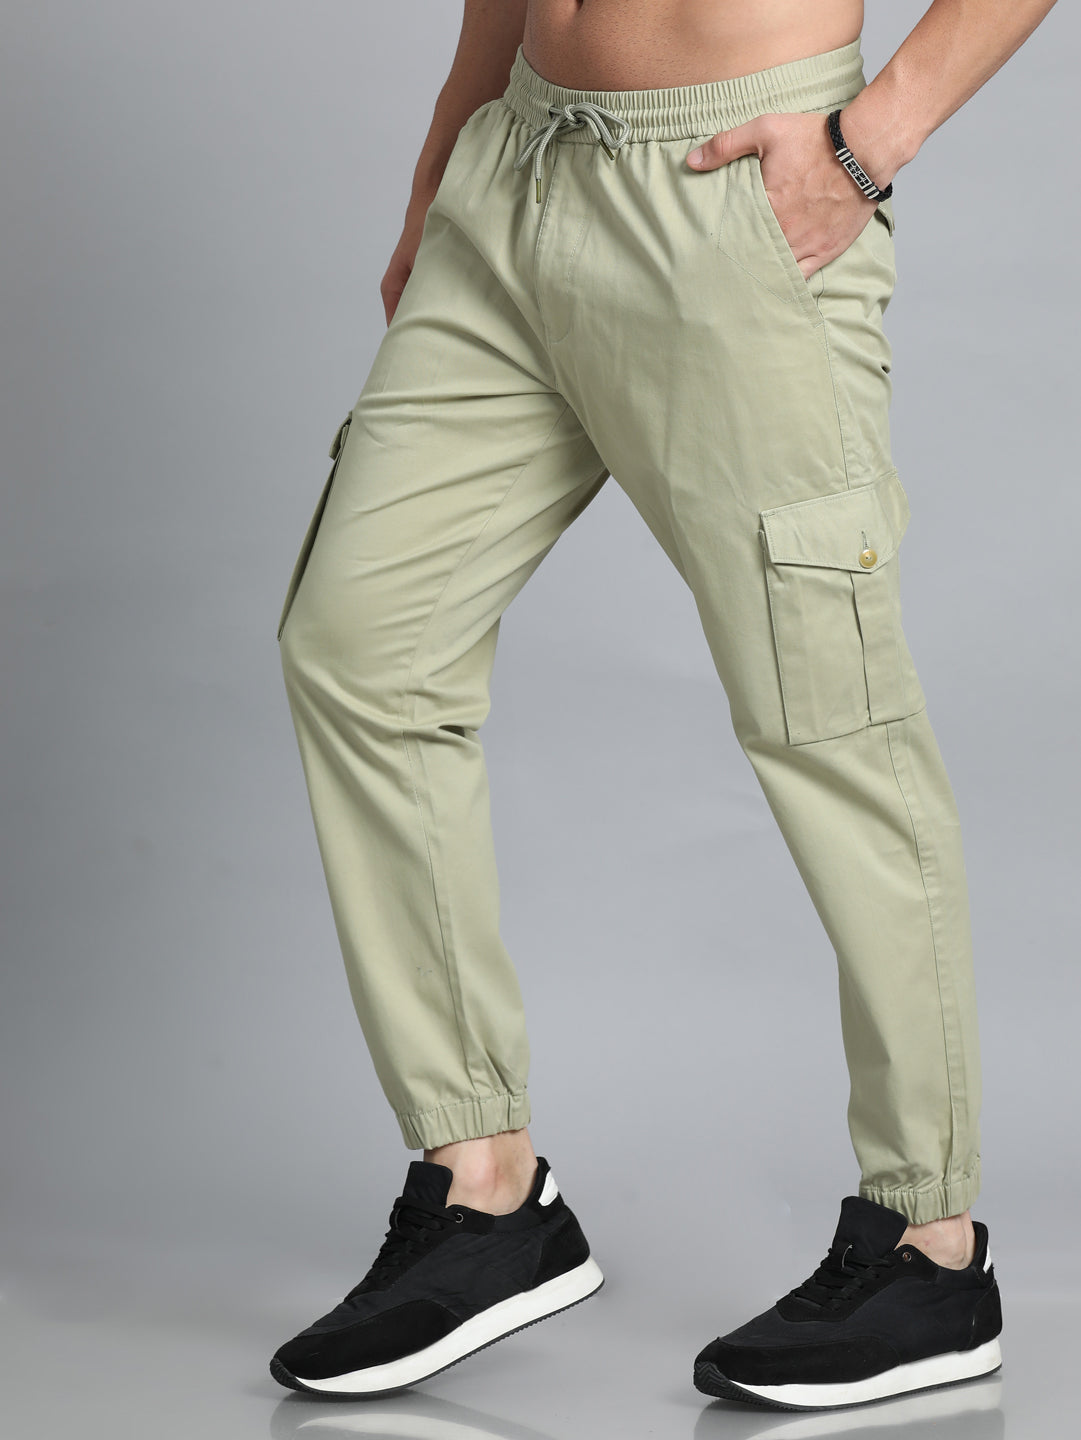 The Souled Store Green Relaxed Fit Cargo Pants